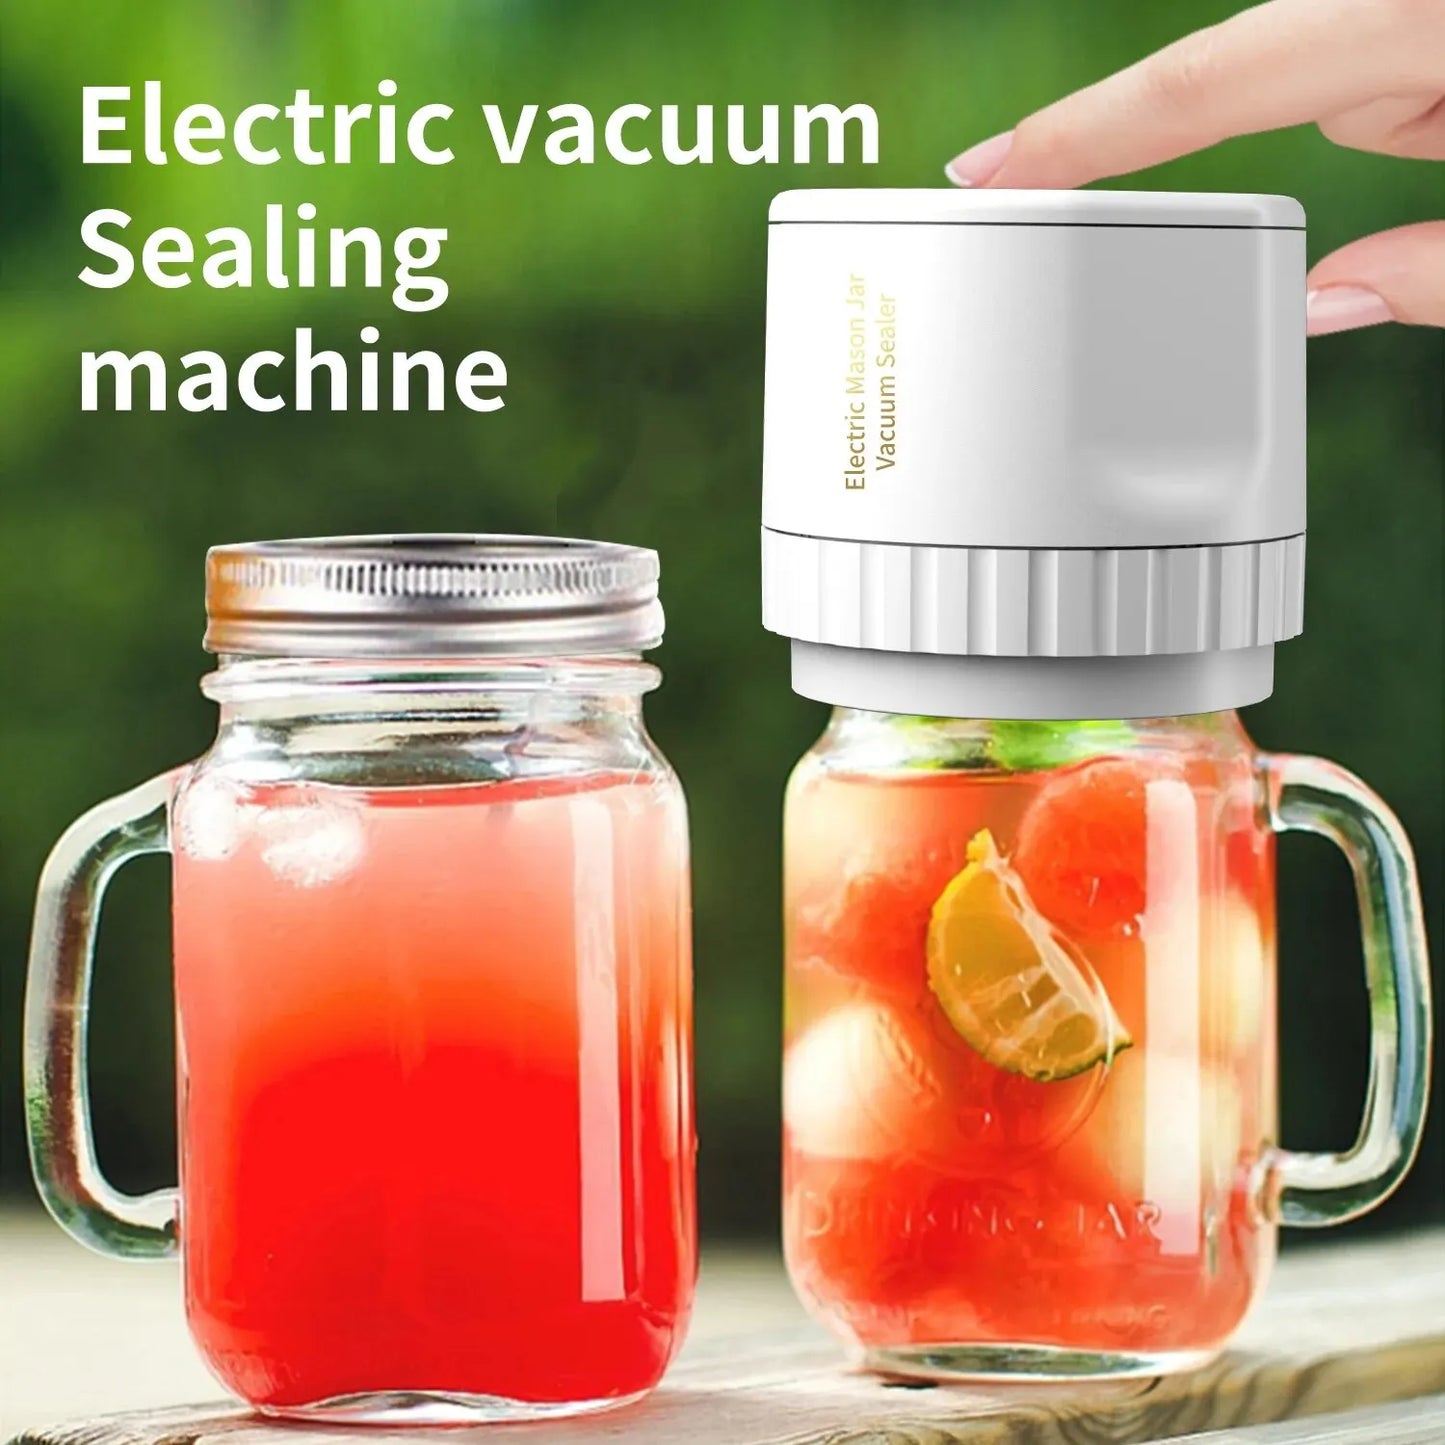 "Preserve Freshness with Ease: Electric Mason Jar Vacuum Sealer for Convenient Food Storage!